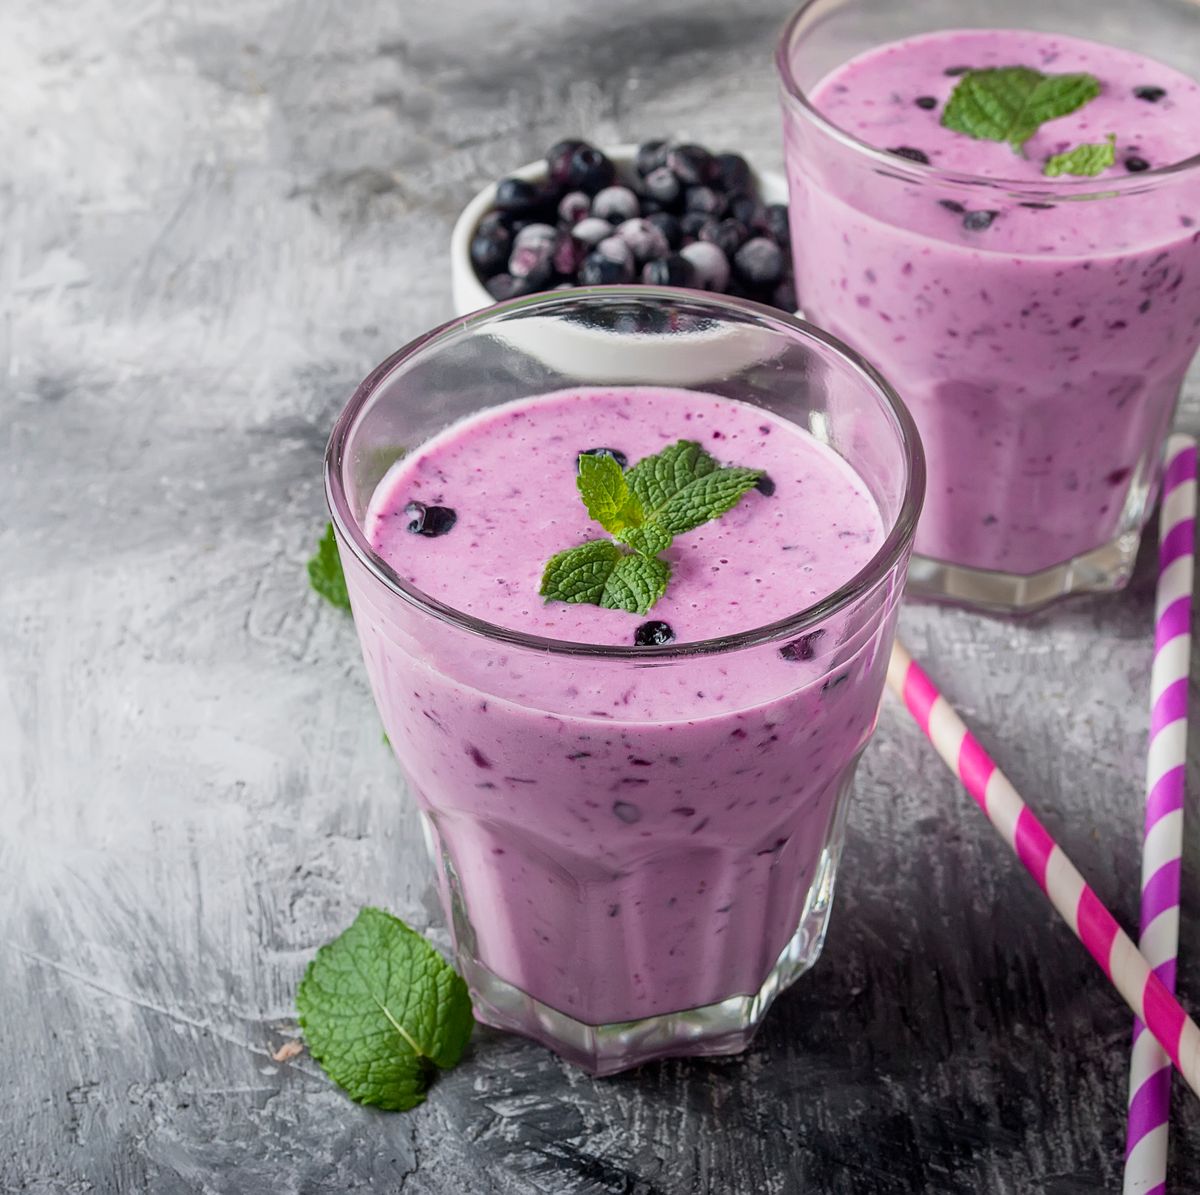 https://hips.hearstapps.com/hmg-prod/images/high-angle-view-of-smoothie-in-drinking-glasses-on-royalty-free-image-1032740172-1564392118.jpg?crop=0.672xw:1.00xh;0.165xw,0&resize=1200:*